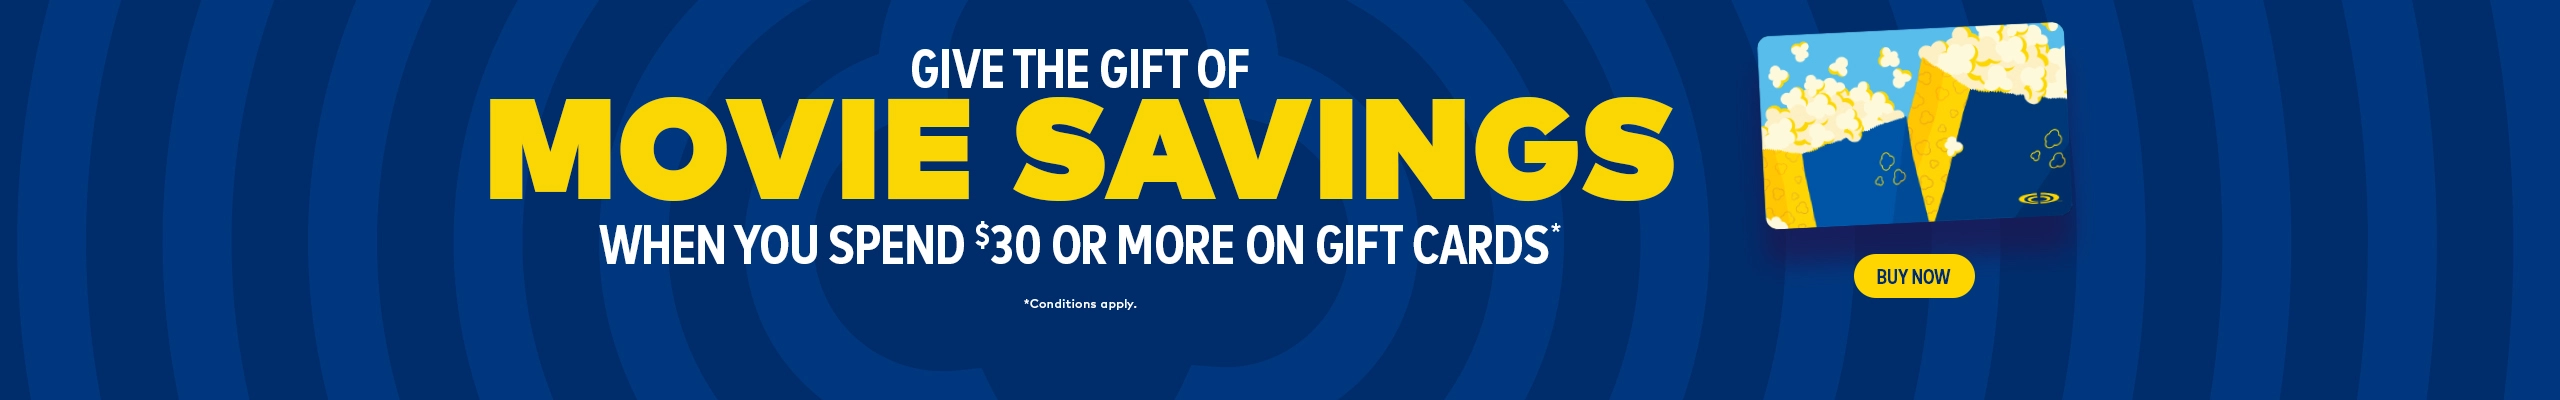 Give the gift of movie savings when you spend $30 on gift cards